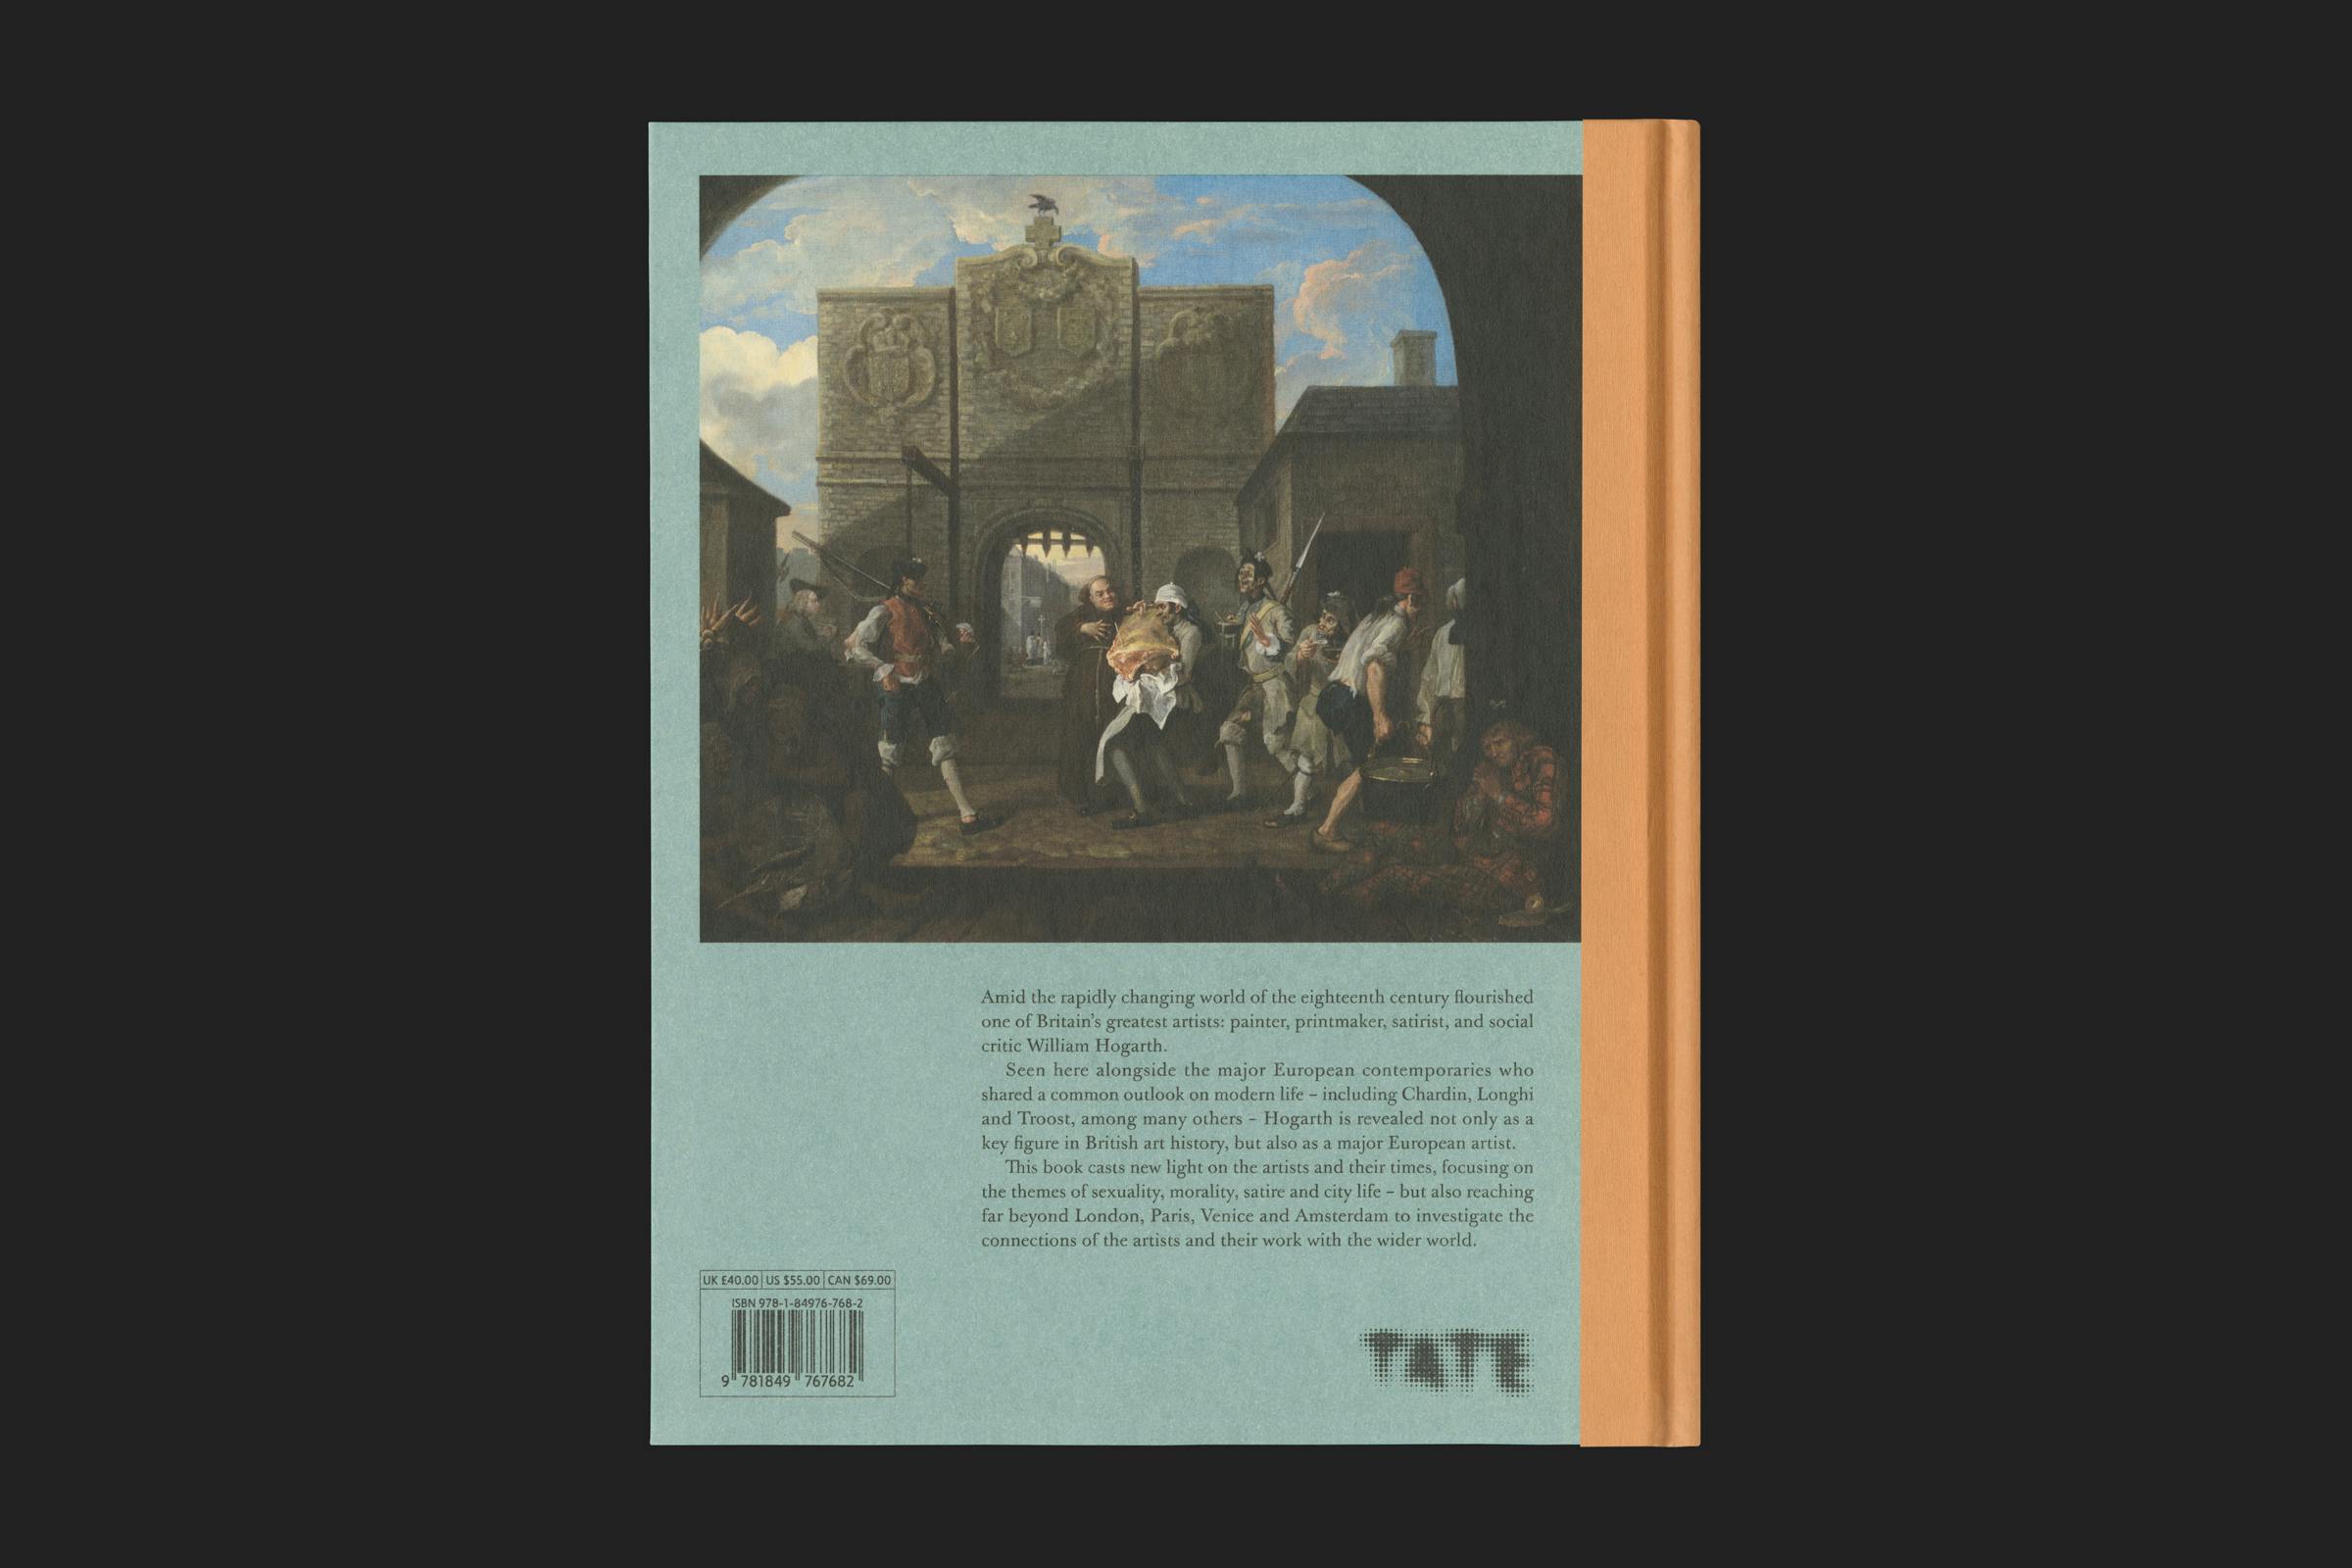 Tate Publishing, William Hogarth, Tate Britain, Hogarth and Europe, Graphic Design by Wolfe Hall